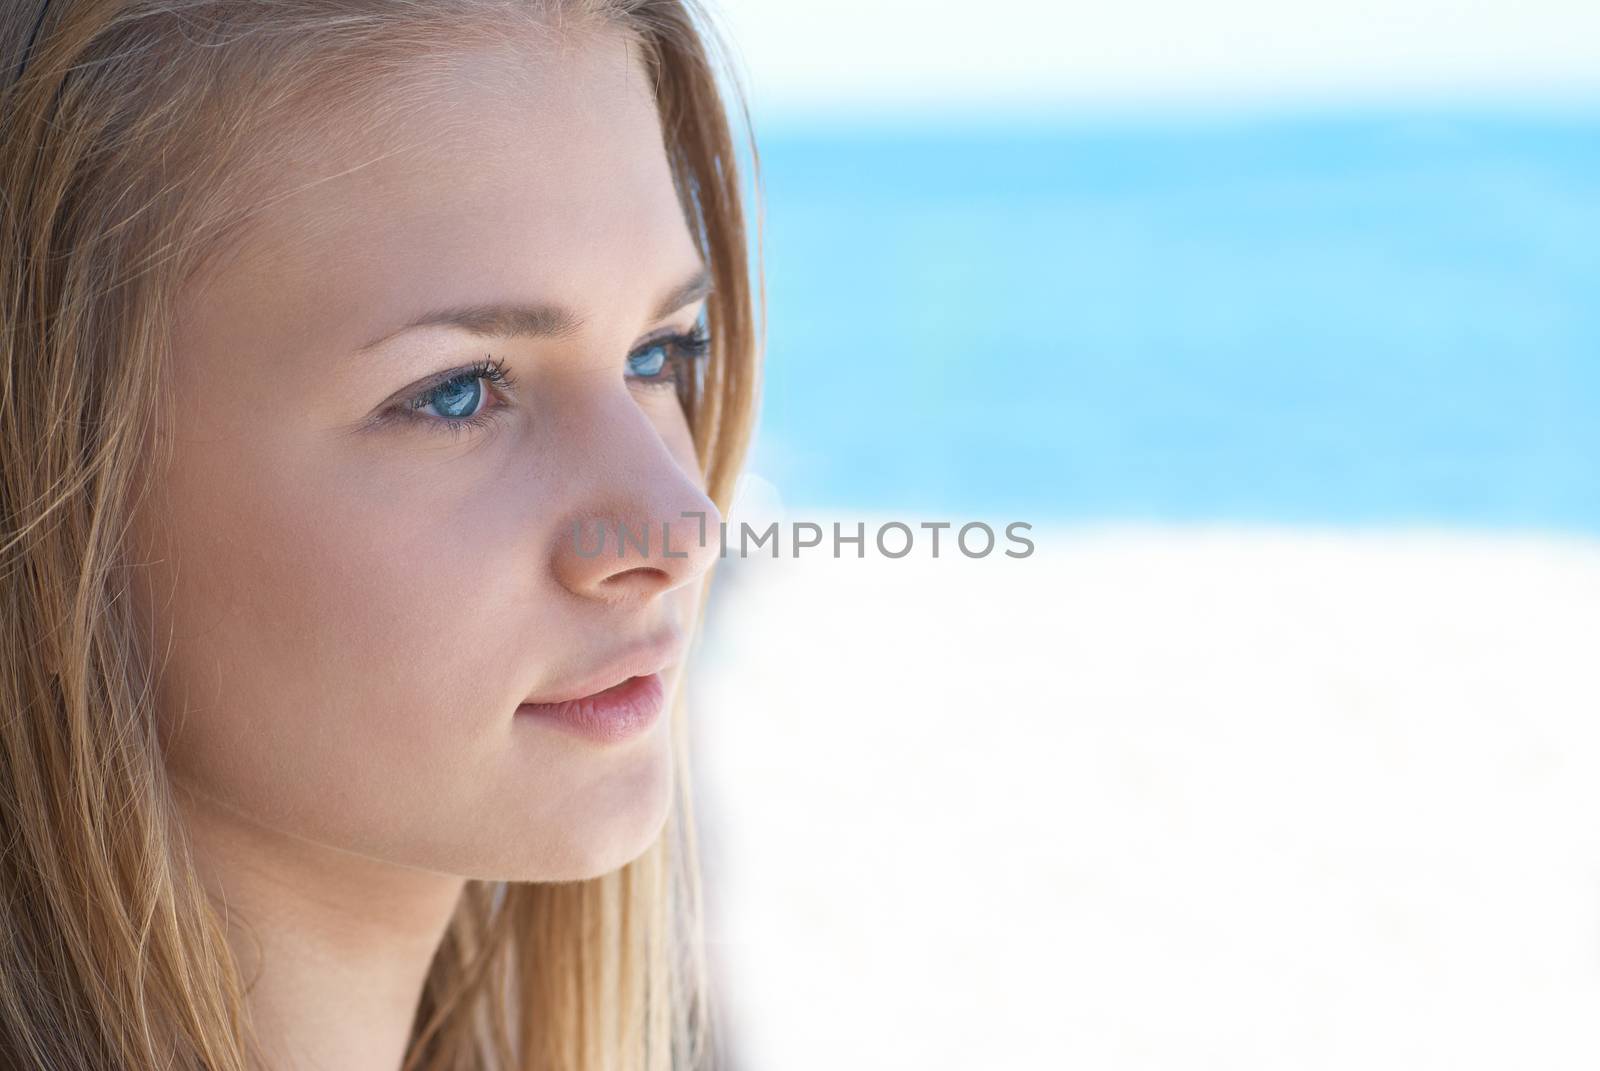 Beautiful blond hair girl with blue eyes outdoors against the sea